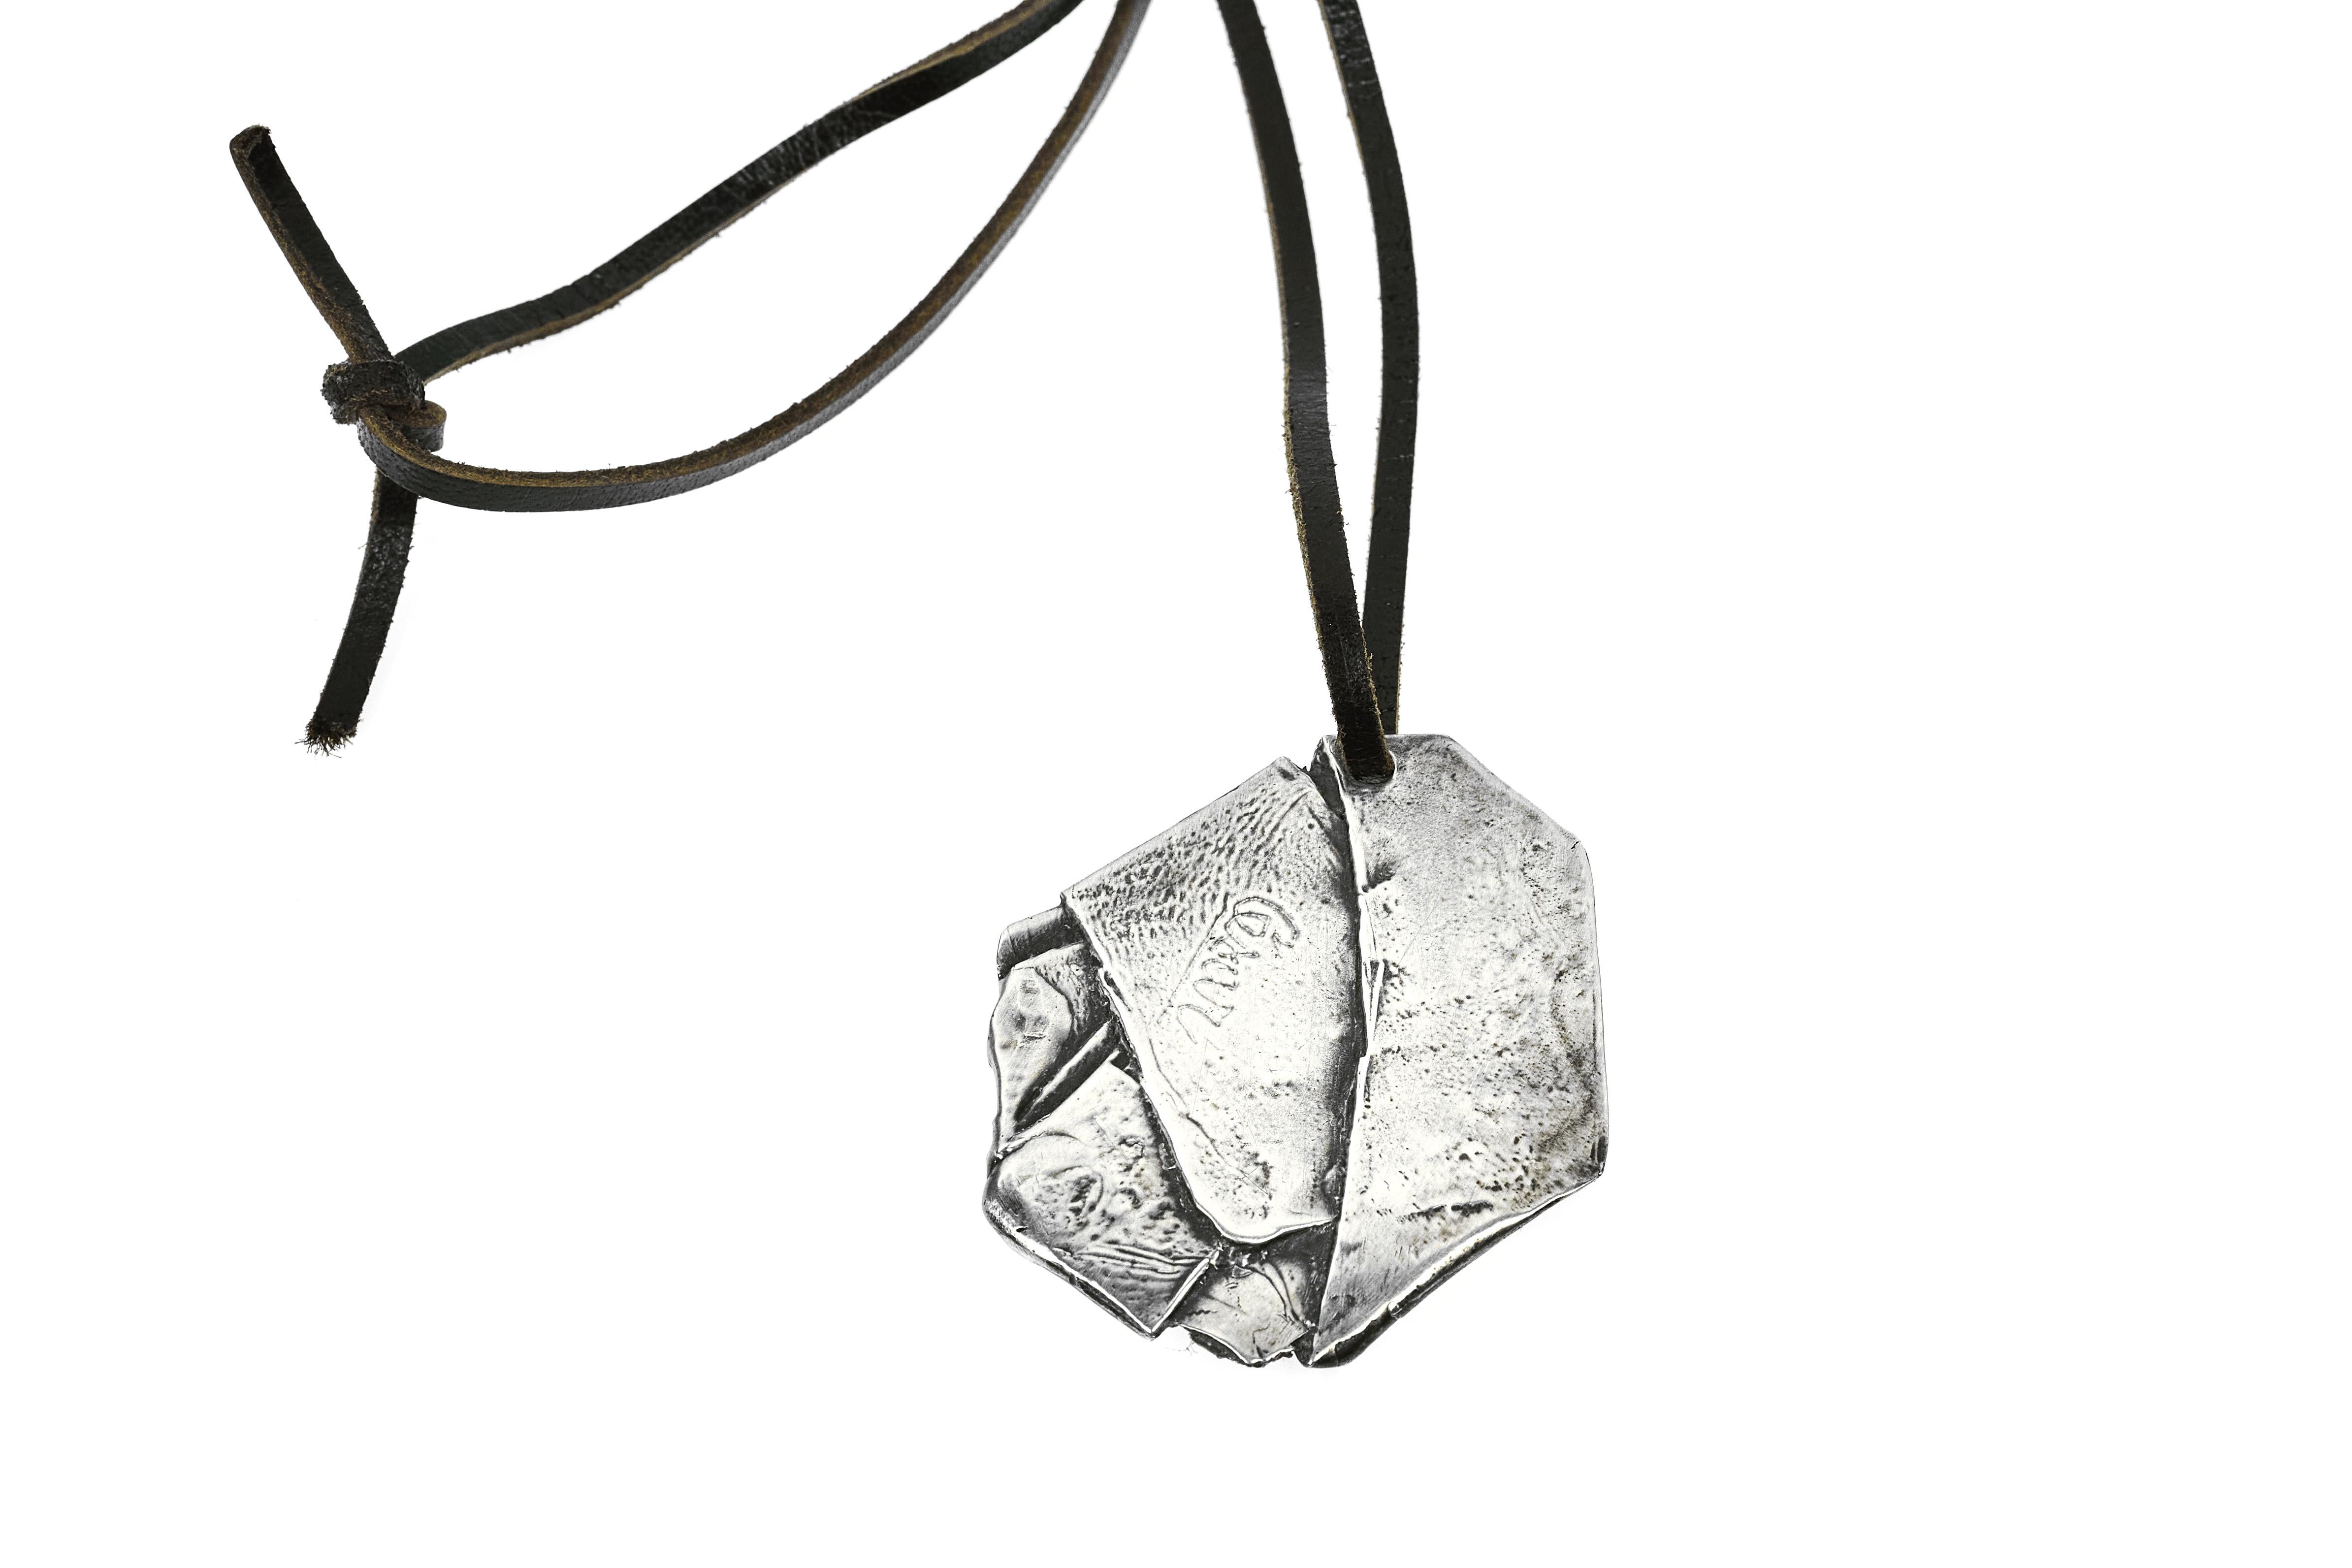 A fine and rare compression pendant by Cesar Baldaccini. Done in his signature style of compressing various metals, this particular piece is rare as it's been done in solid sterling silver. 

Signed on backside 'Cesar',

1975

Measures: 2.5